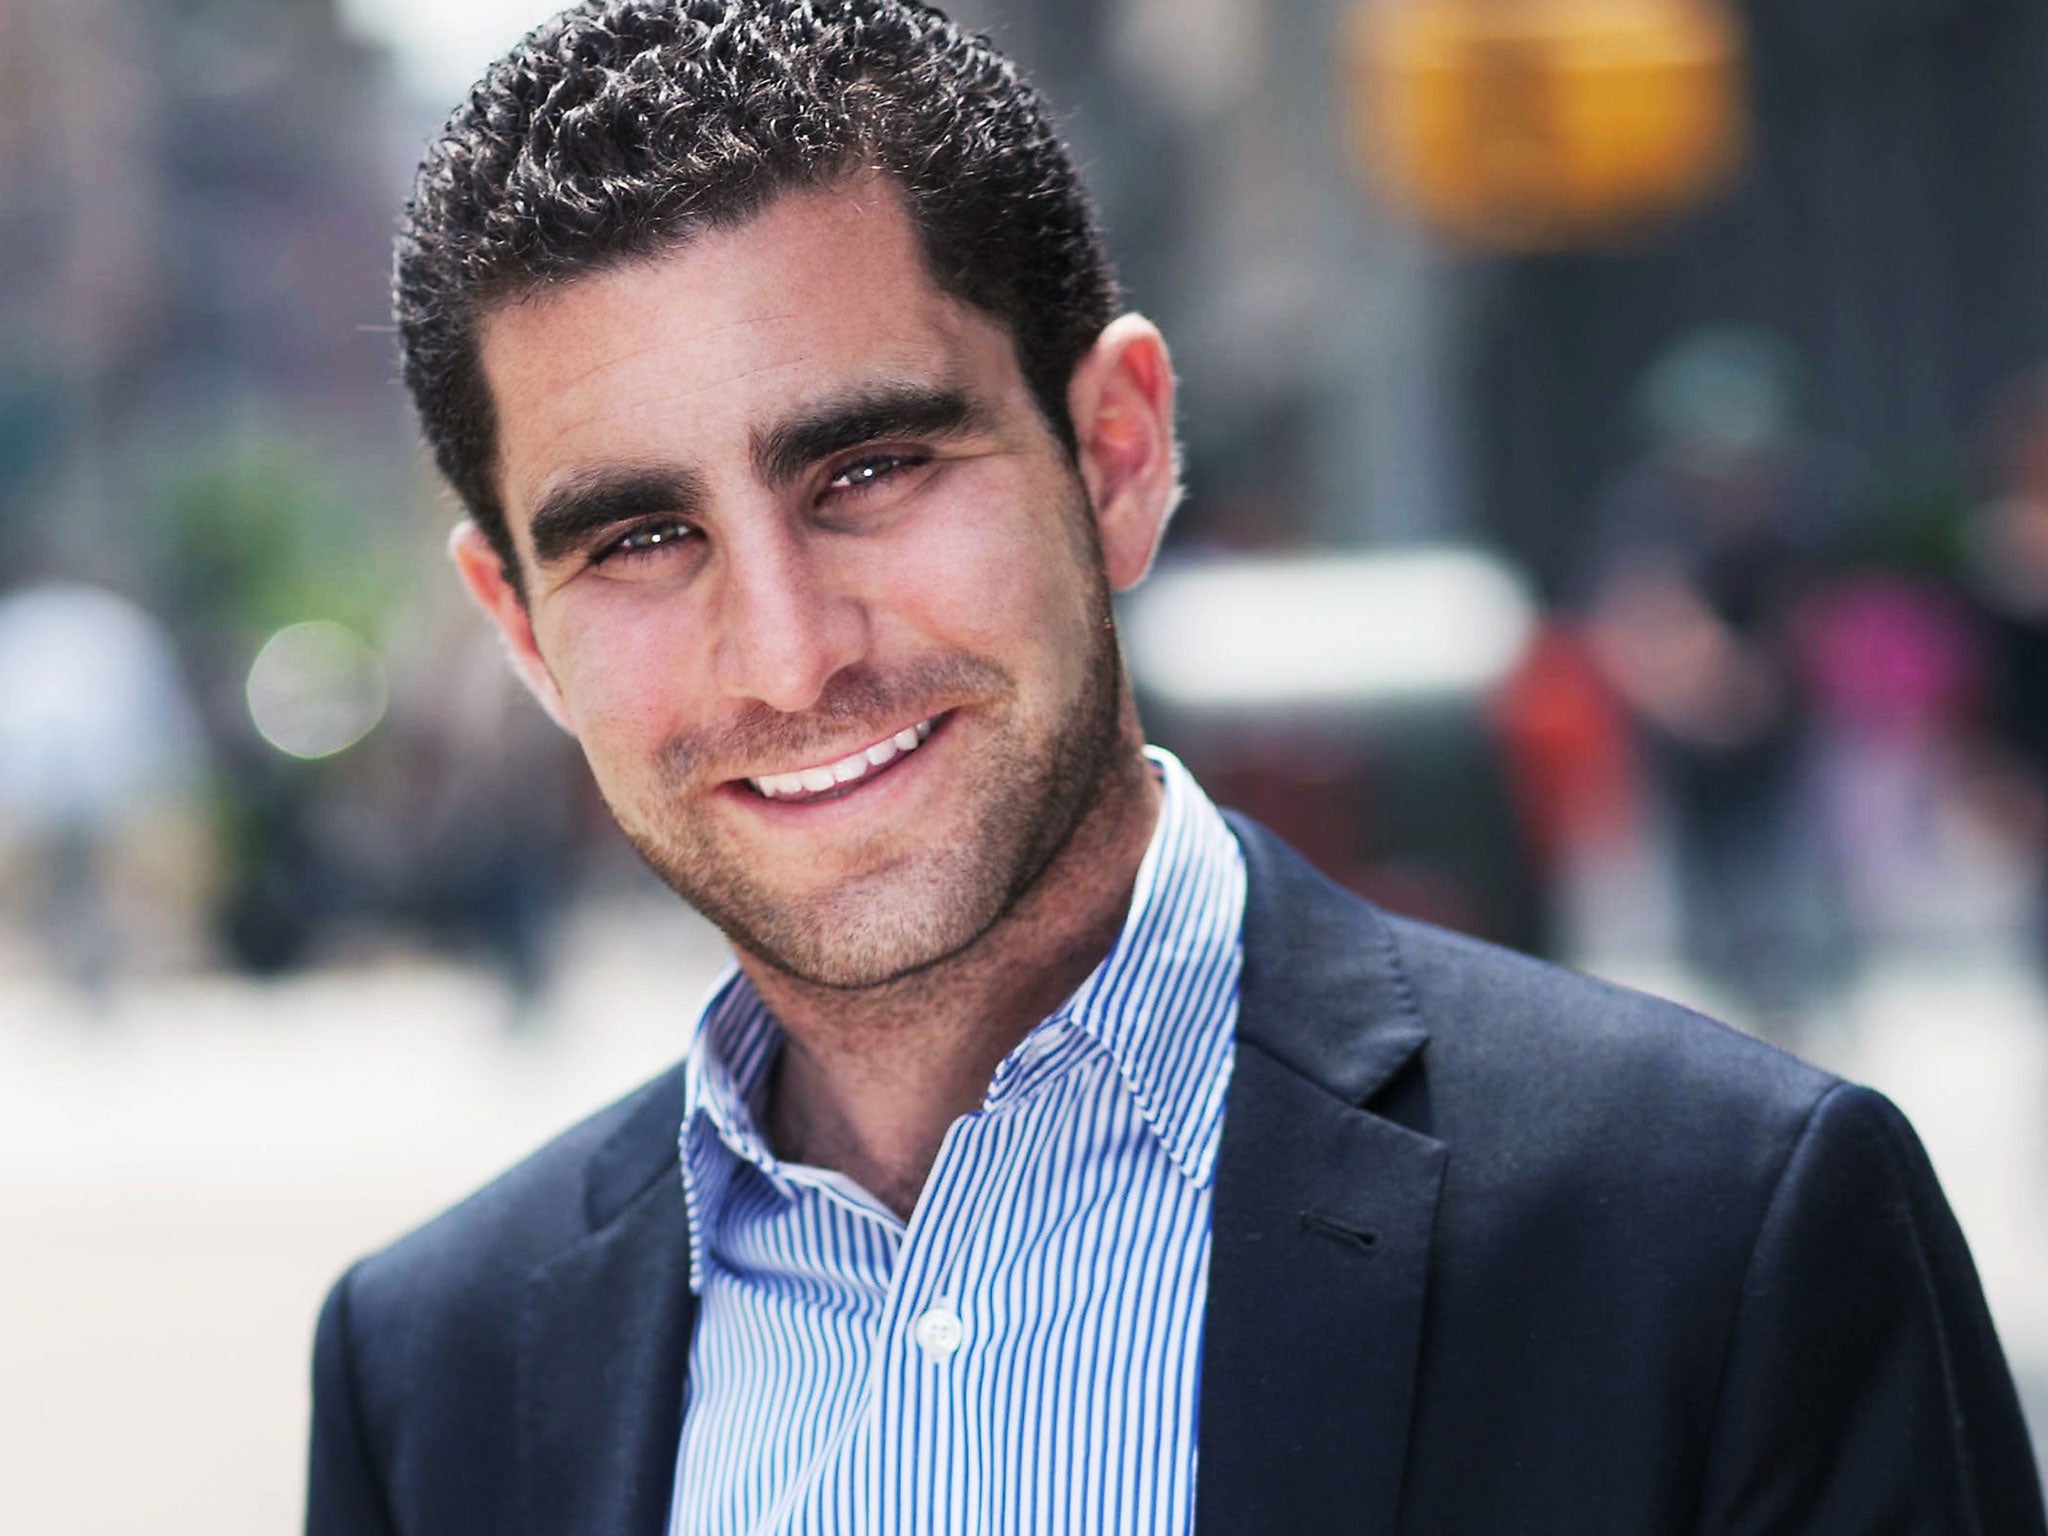 Charlie Shrem, 25, has been sentenced to two years in prison